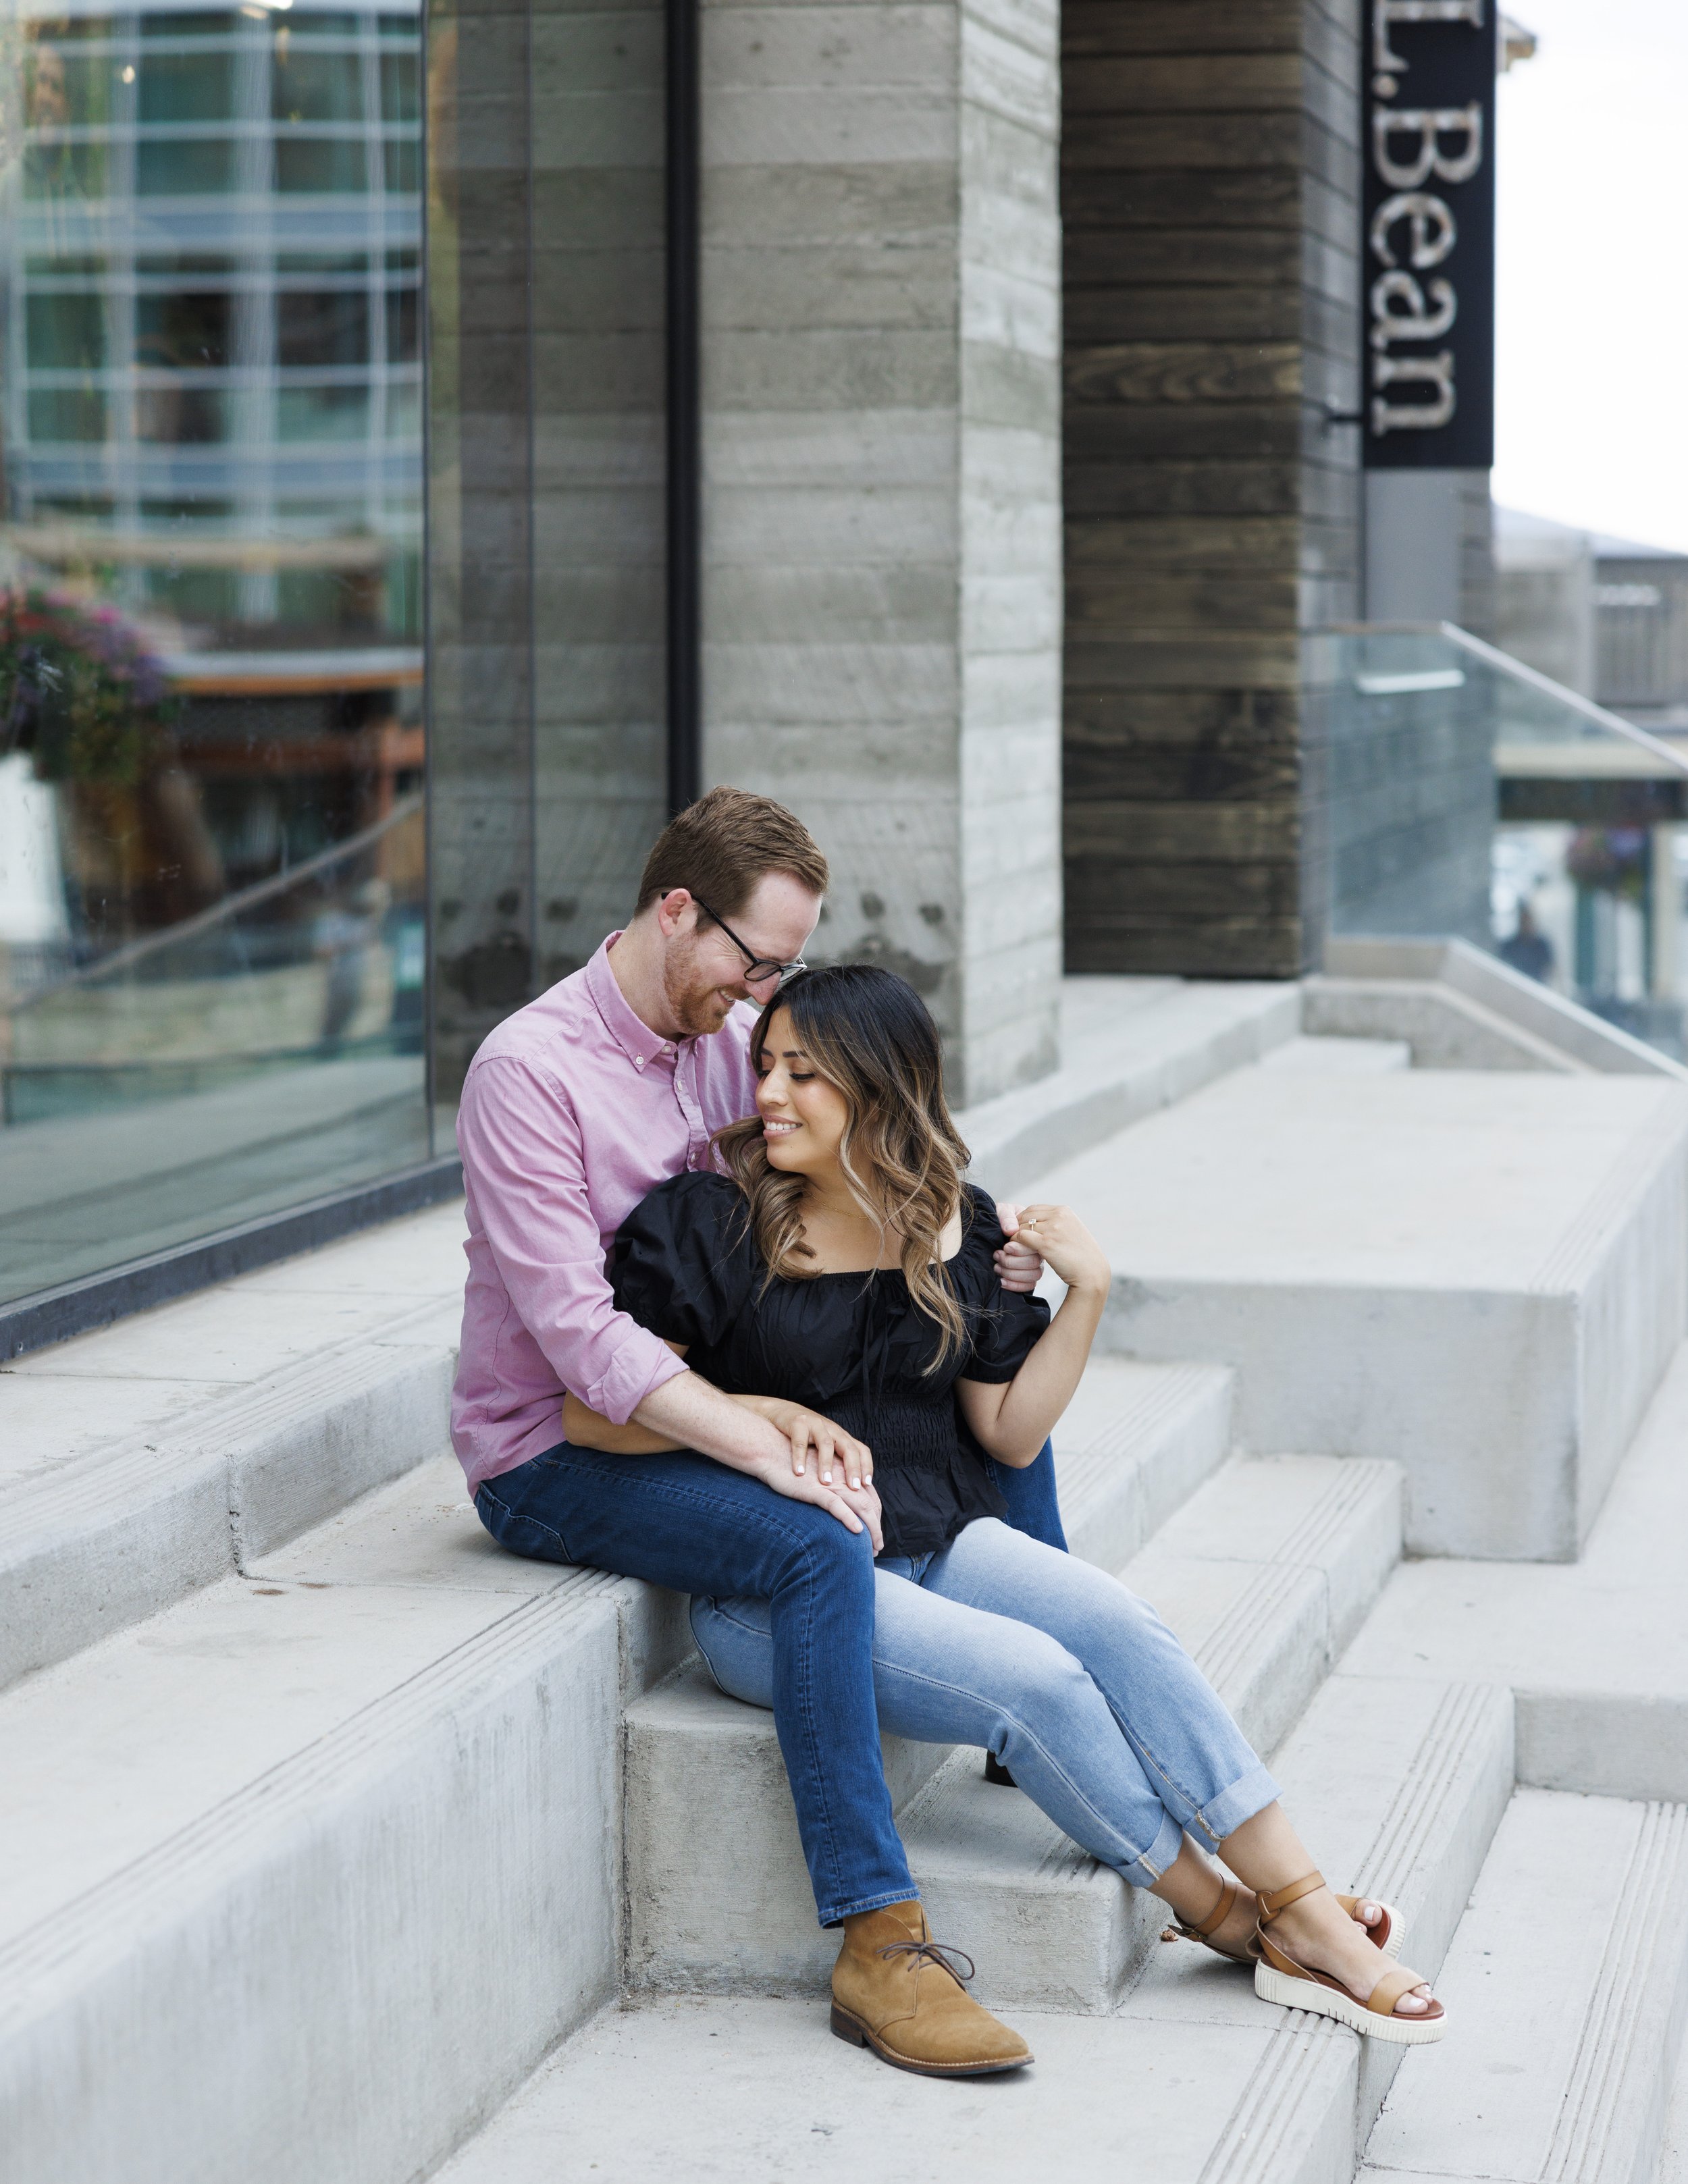  Modern engagement photography in downtown Park City by Savanna Richardson Photography. city engagements professional engagement photographer #ParkCityEngagements #ParkCityPhotographers #SavannaRichardsonPhotography #SavannaRichardsonEngagements 